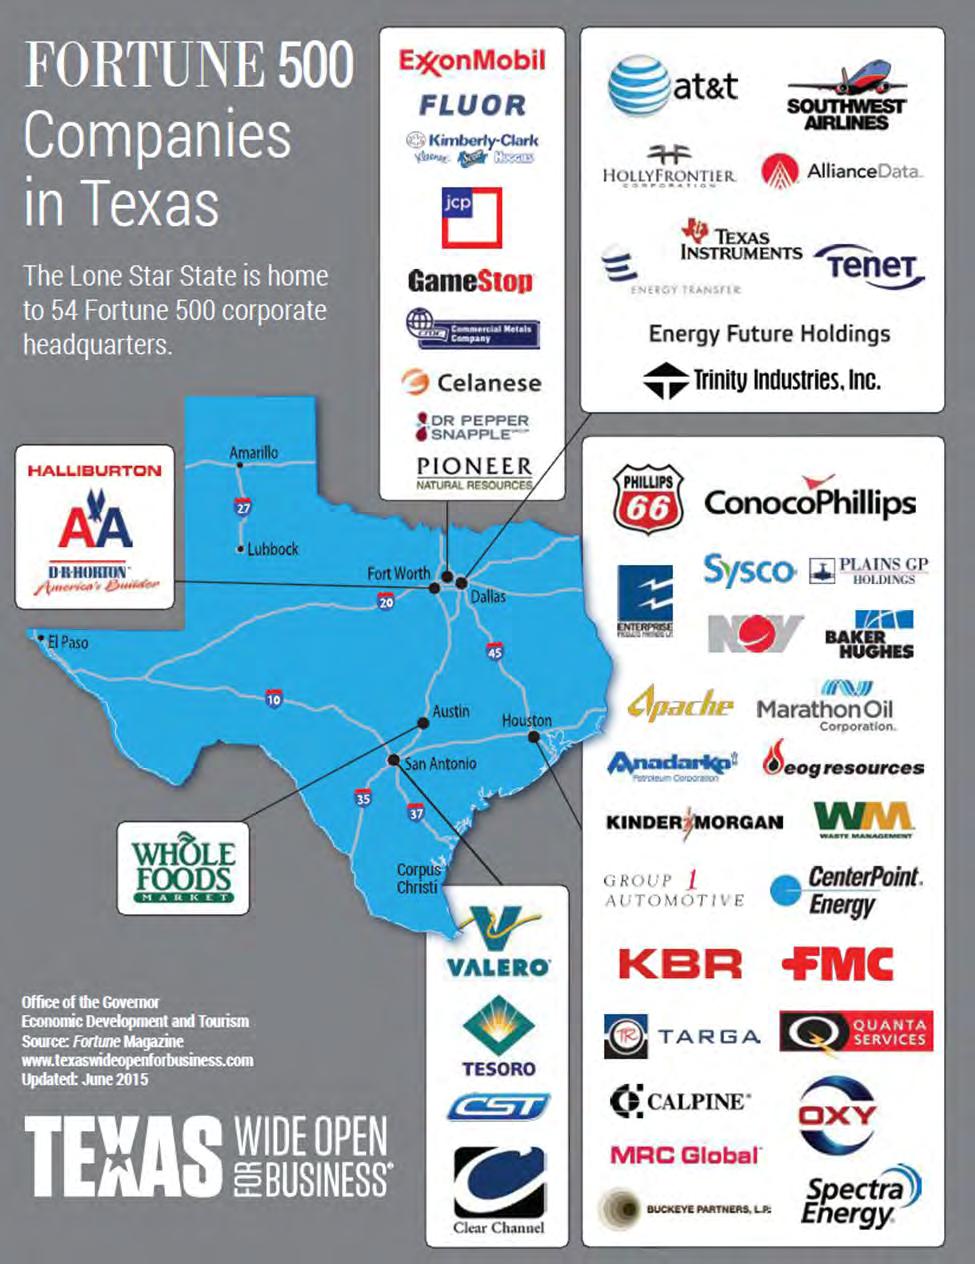 HOU-127 FORTUNE 500 COMPANIES IN TEXAS TEXAS HAS ONE OF THE LARGEST CONCENTRATIONS OF FORTUNE 500 HEADQUARTERS IN THE U.S. EJf(onMobii FLUOR ~ II ll,,~r~.!,mer.